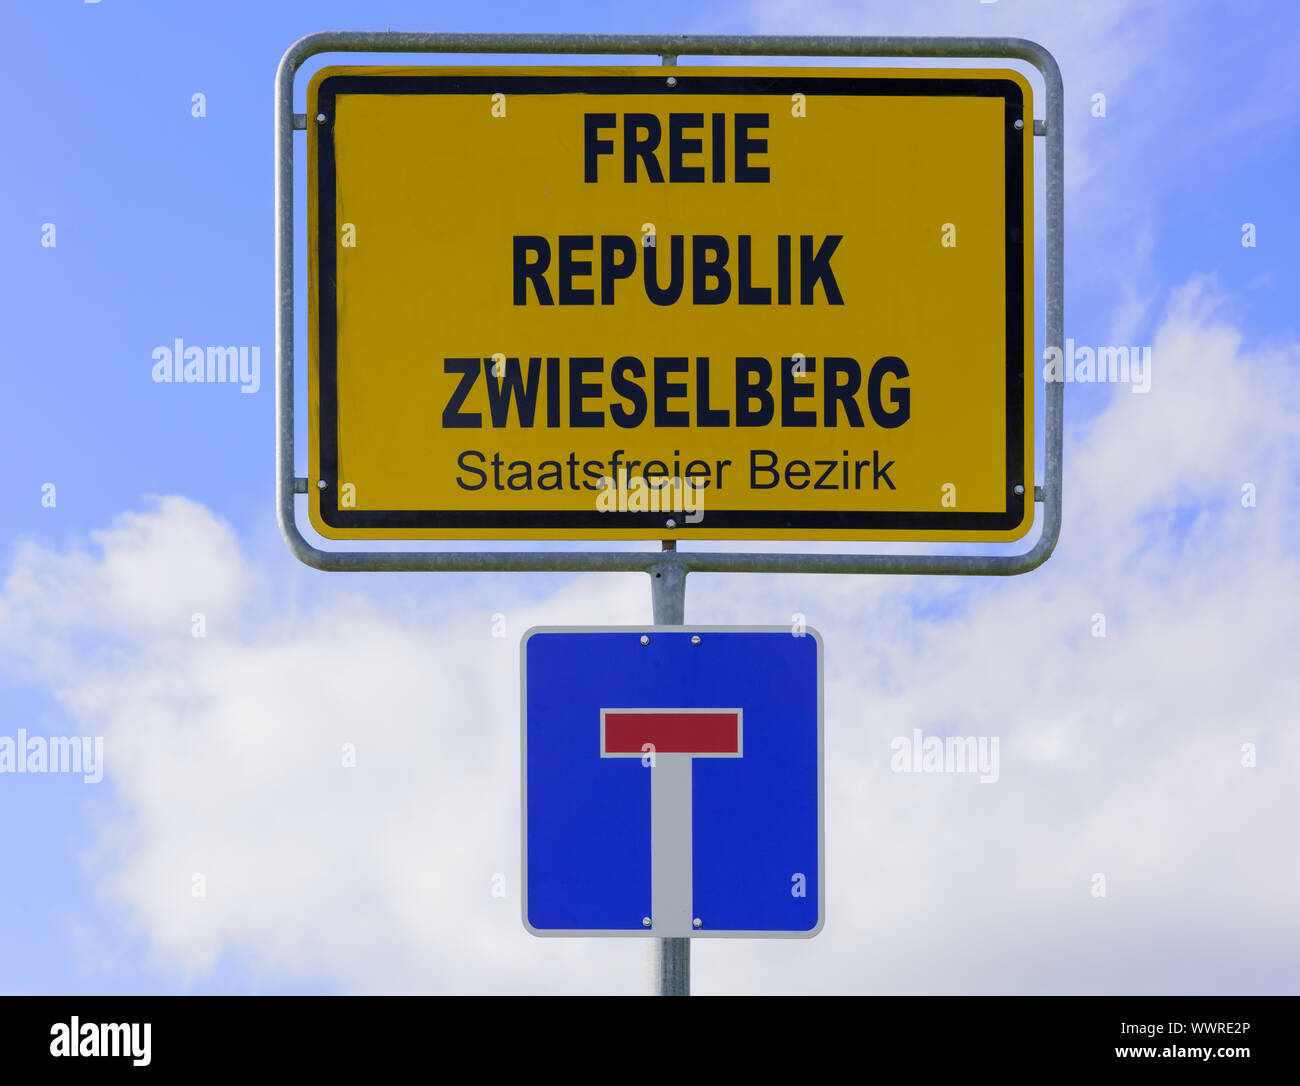 City sign for the Free Republic of Zwieselberg in Bavaria Stock Photo